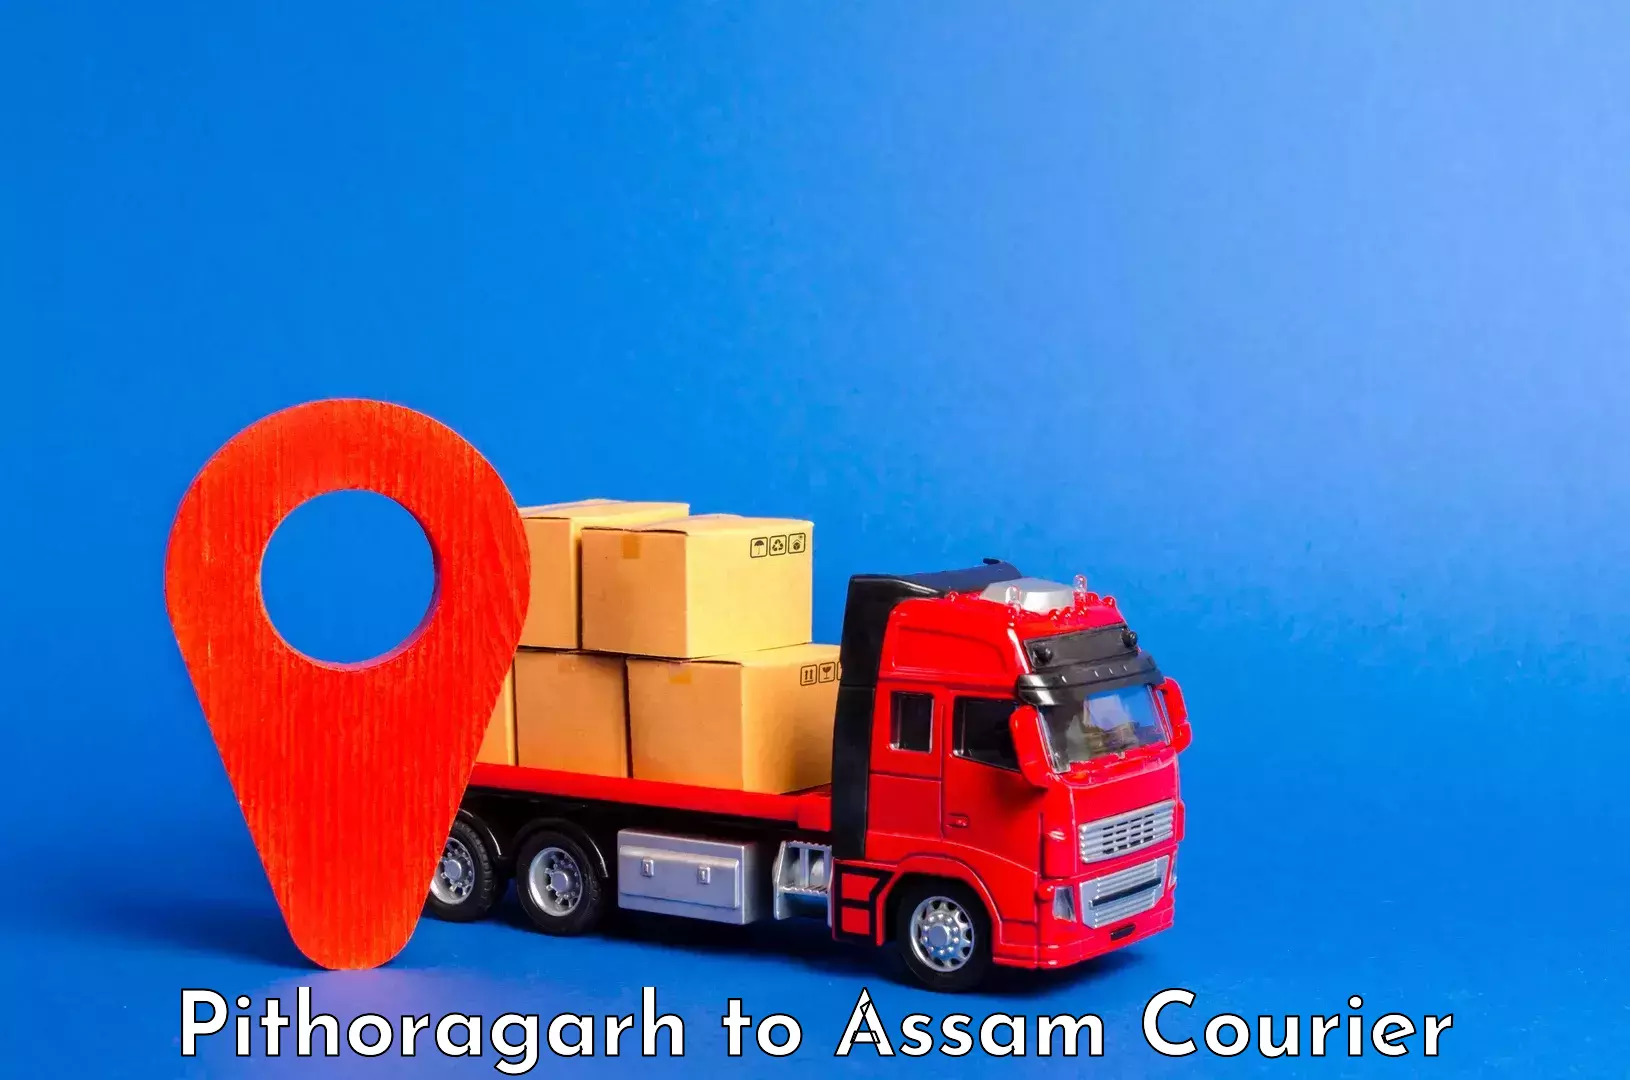 Luggage delivery app Pithoragarh to Assam